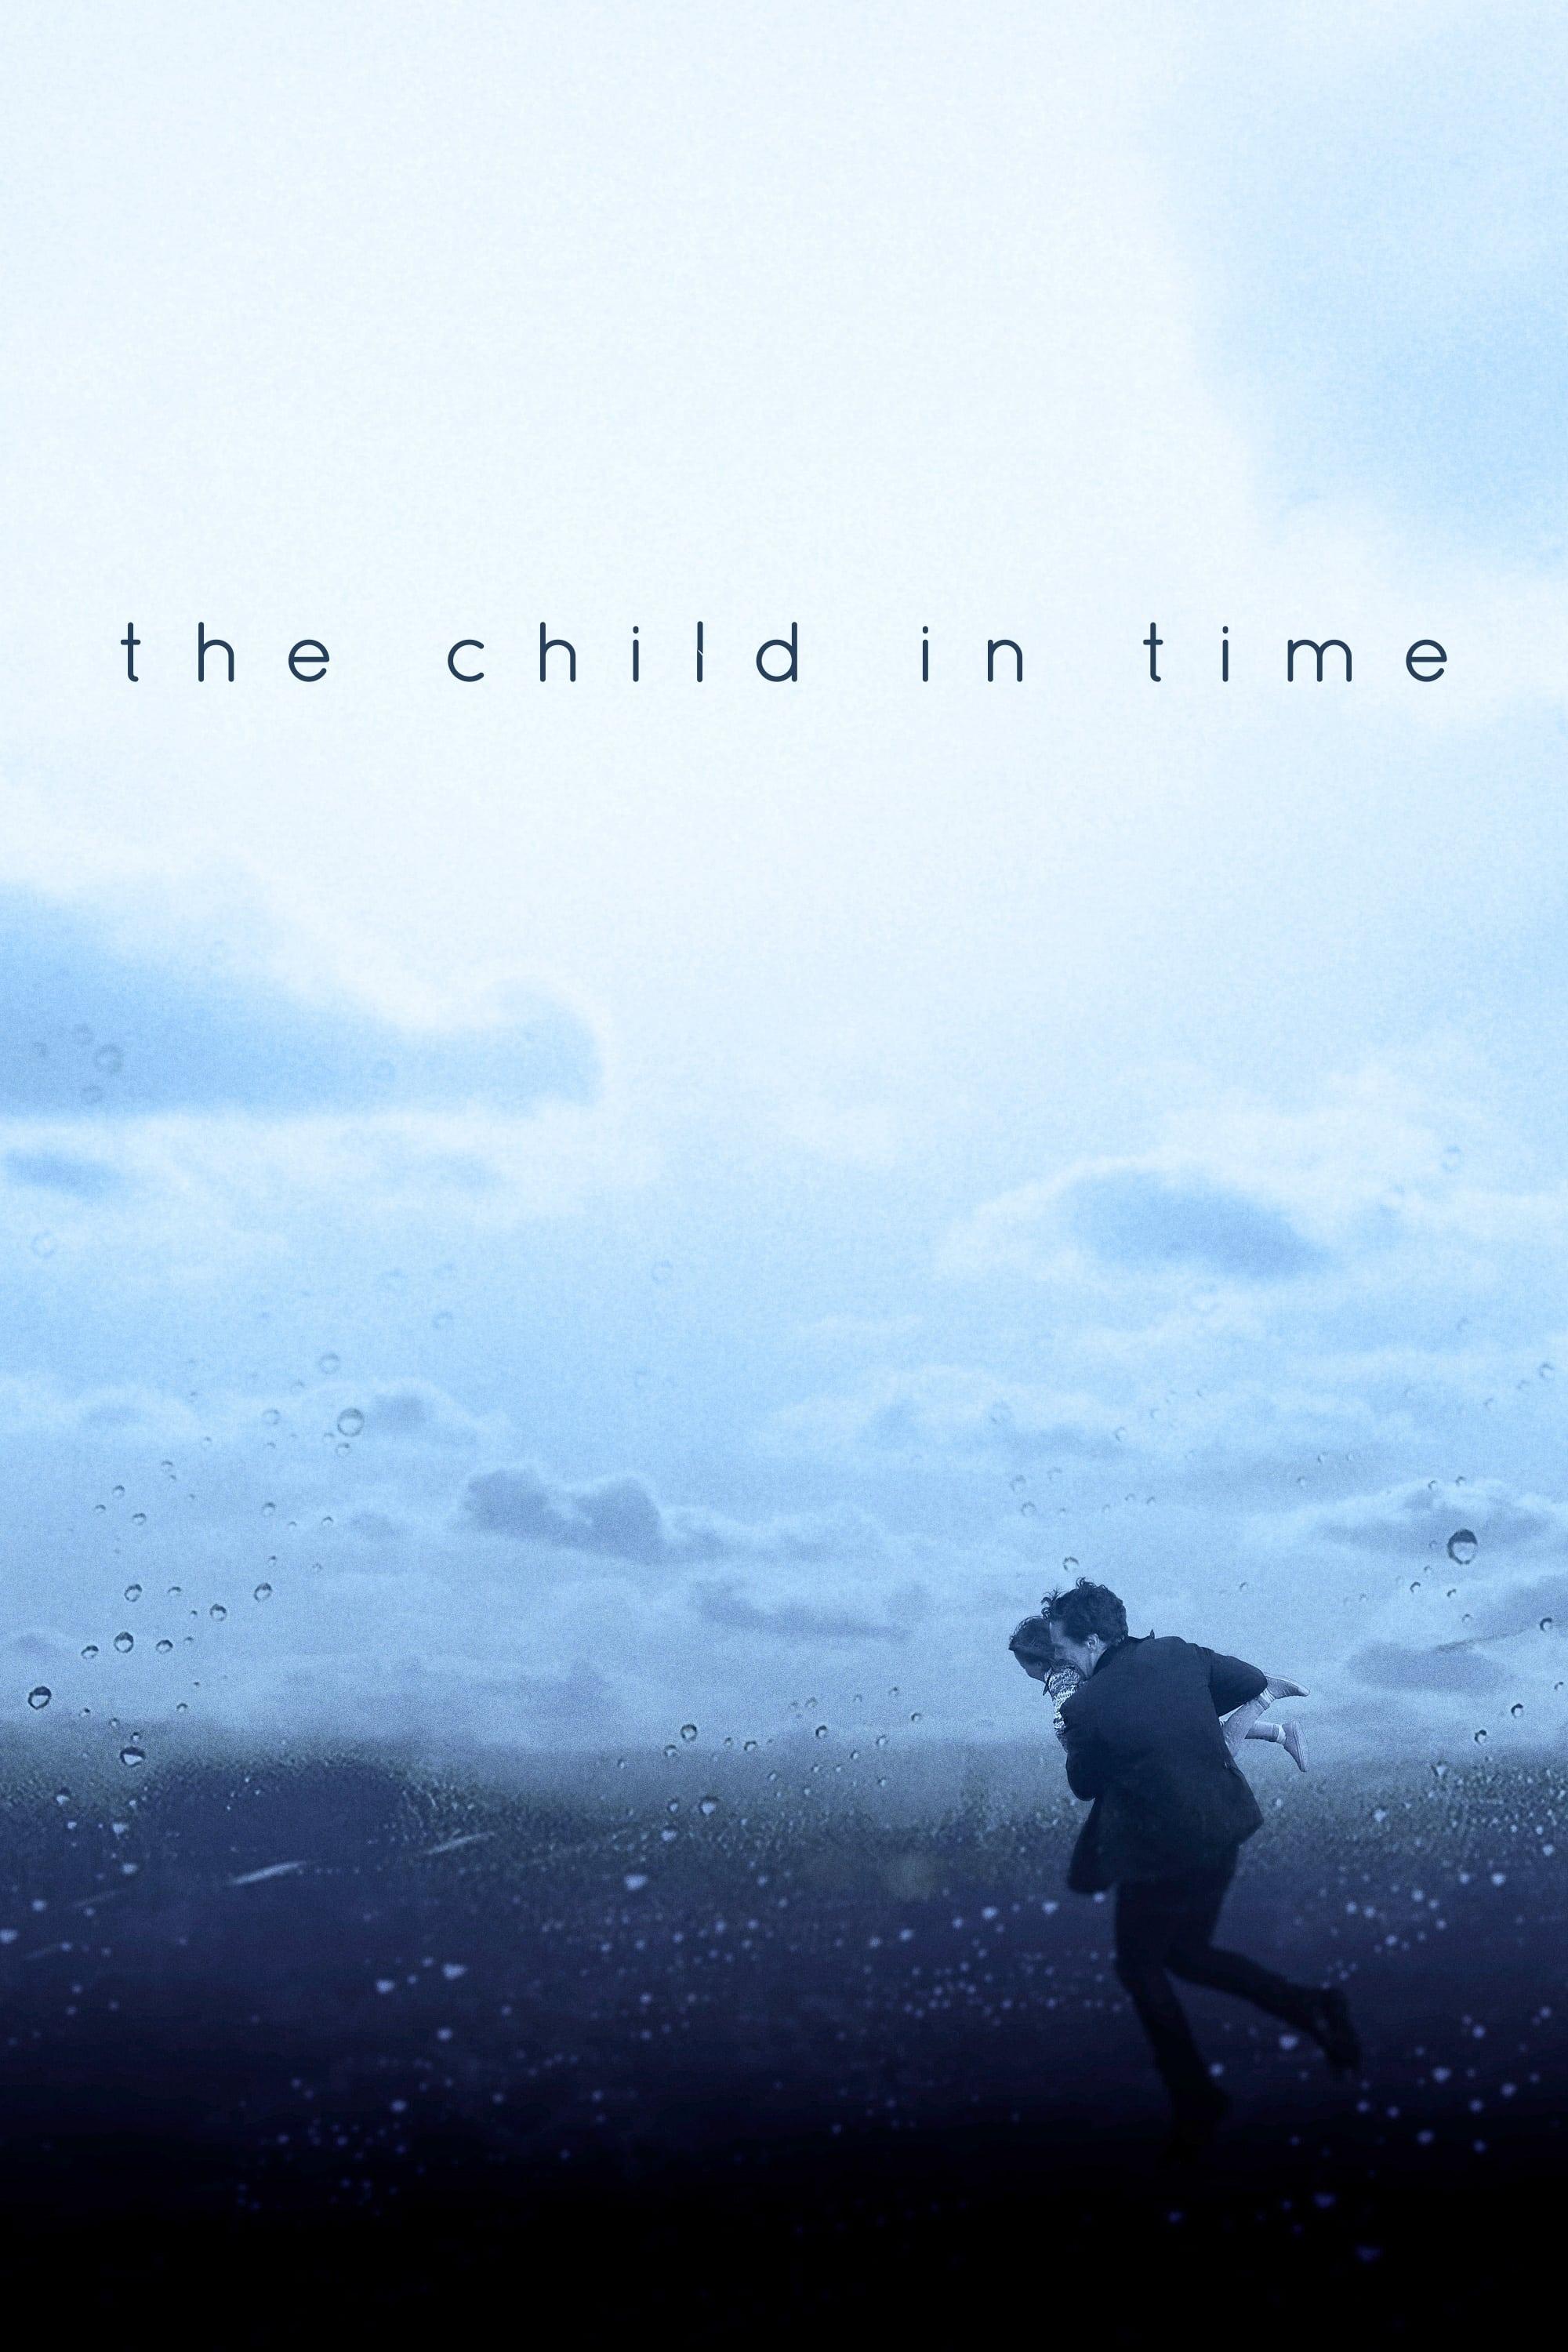 The Child in Time poster